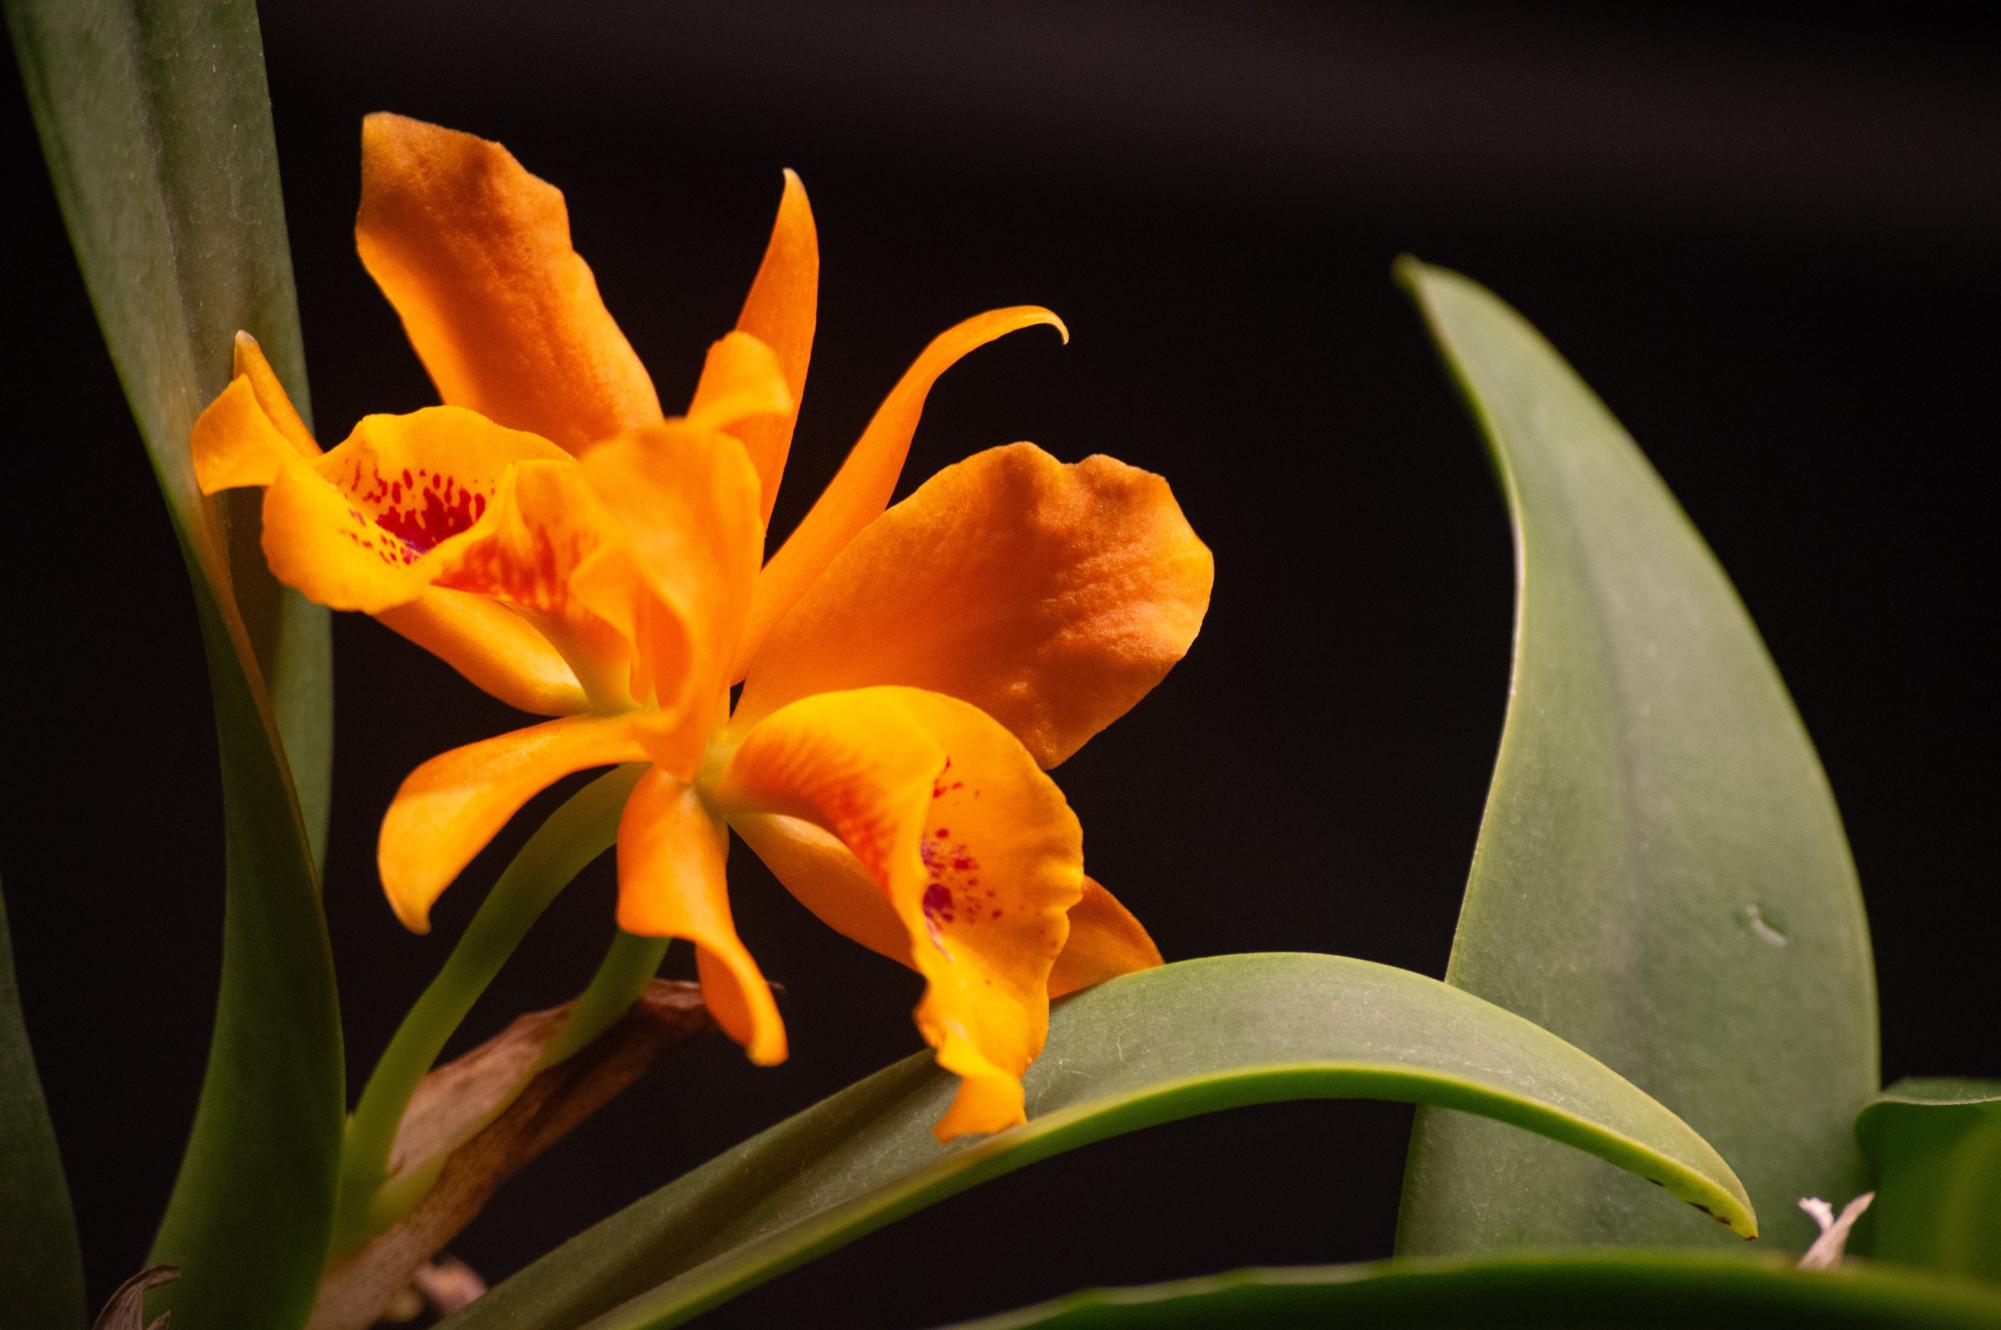 Springtime sentiments bloom at Franklin Park Zoo with orchid exhibit